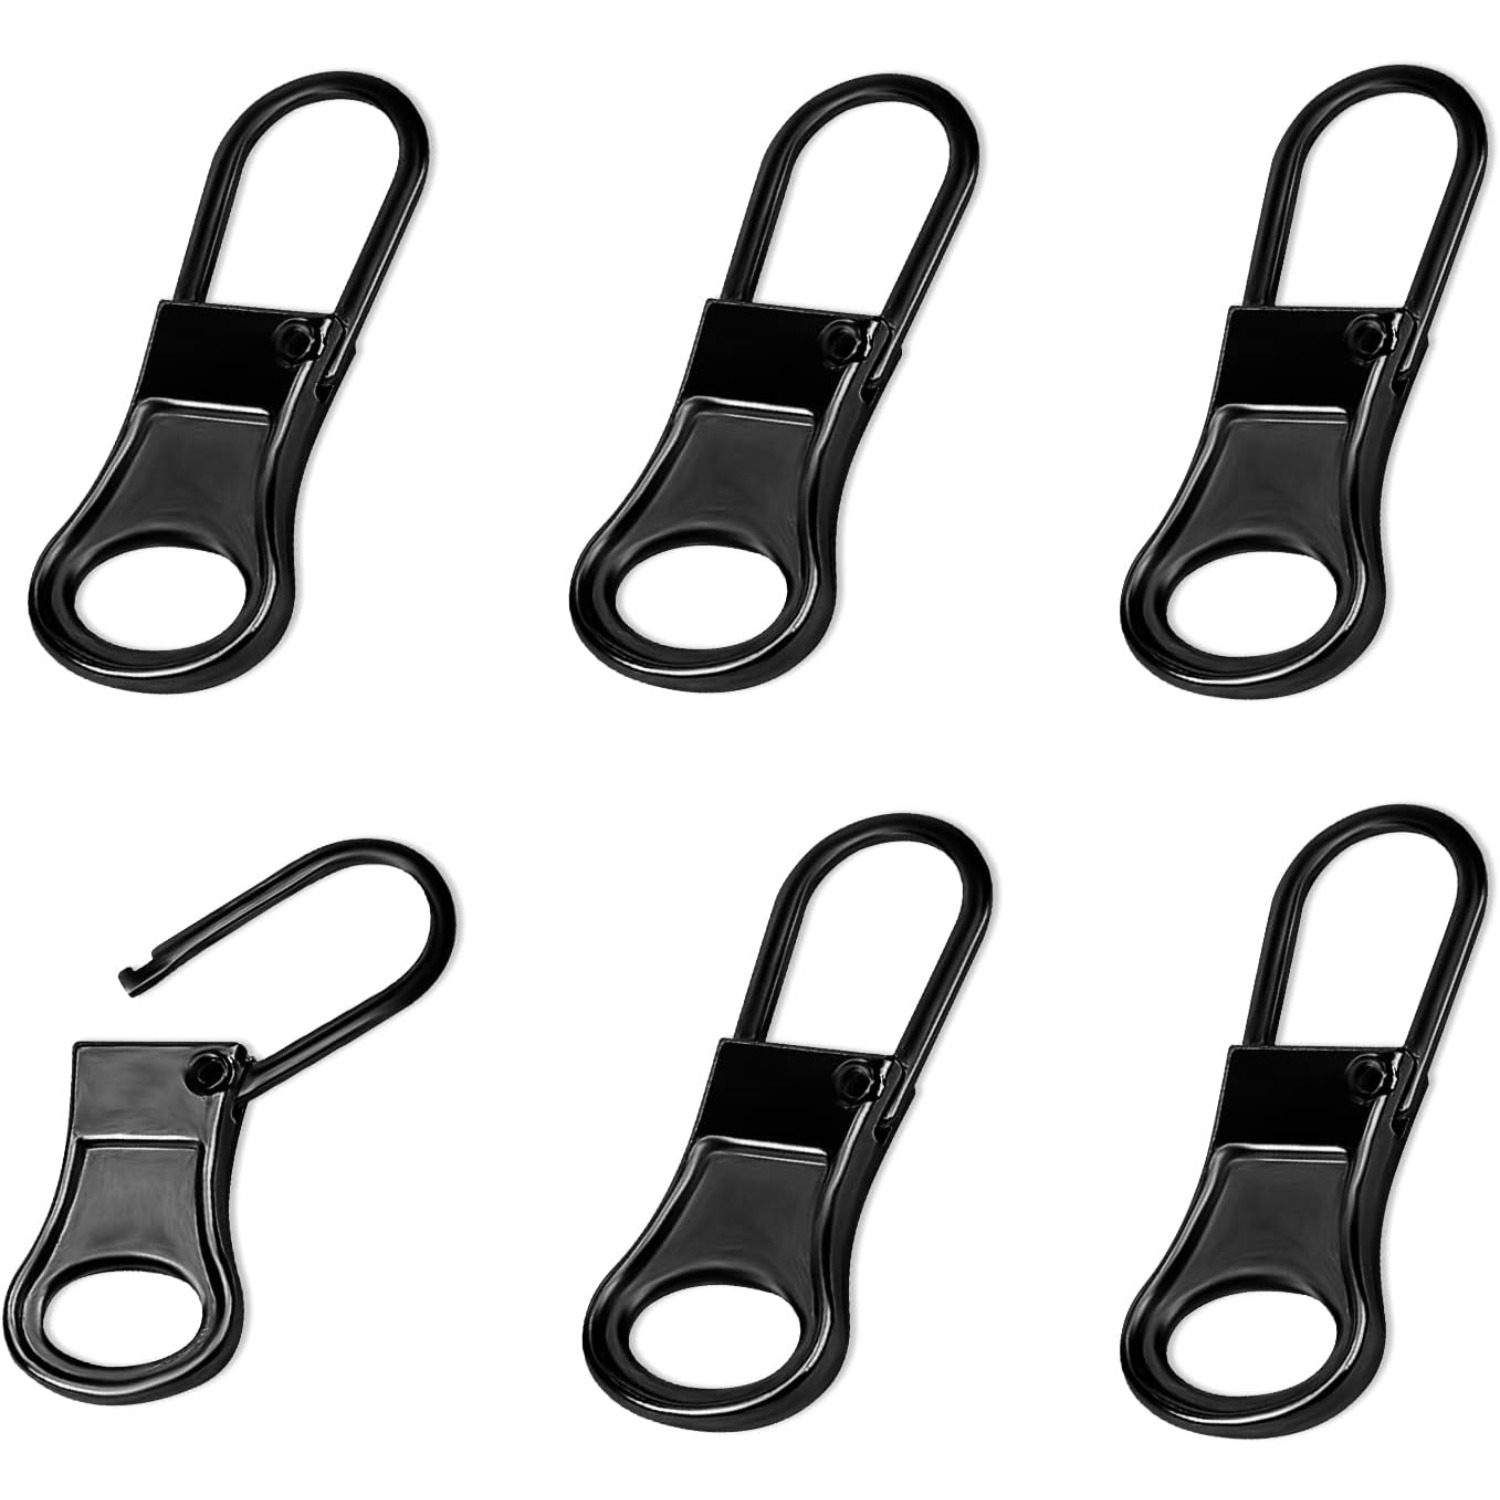  10Pcs Replacement Zipper Pull Detachable Zipper Pull Tabs Zipper  Pull Replacement Metal Zipper Pulls for Luggage Clothing Jackets Jeans  Backpacks Boots Dresses Purse Coat